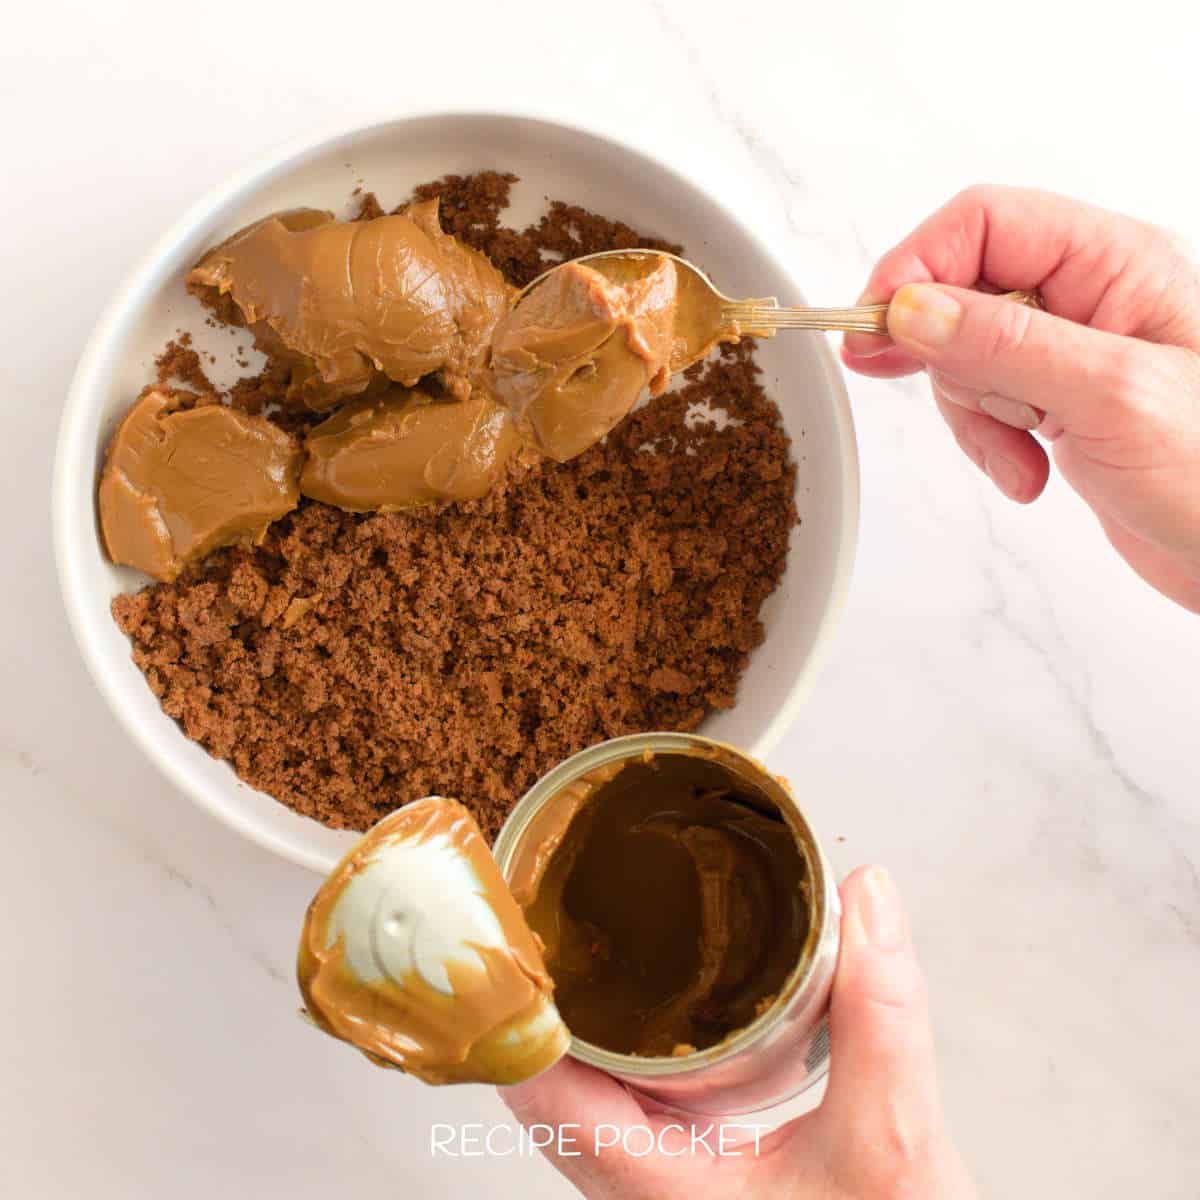 Caramel sauce and cake crumbs in a bowl.